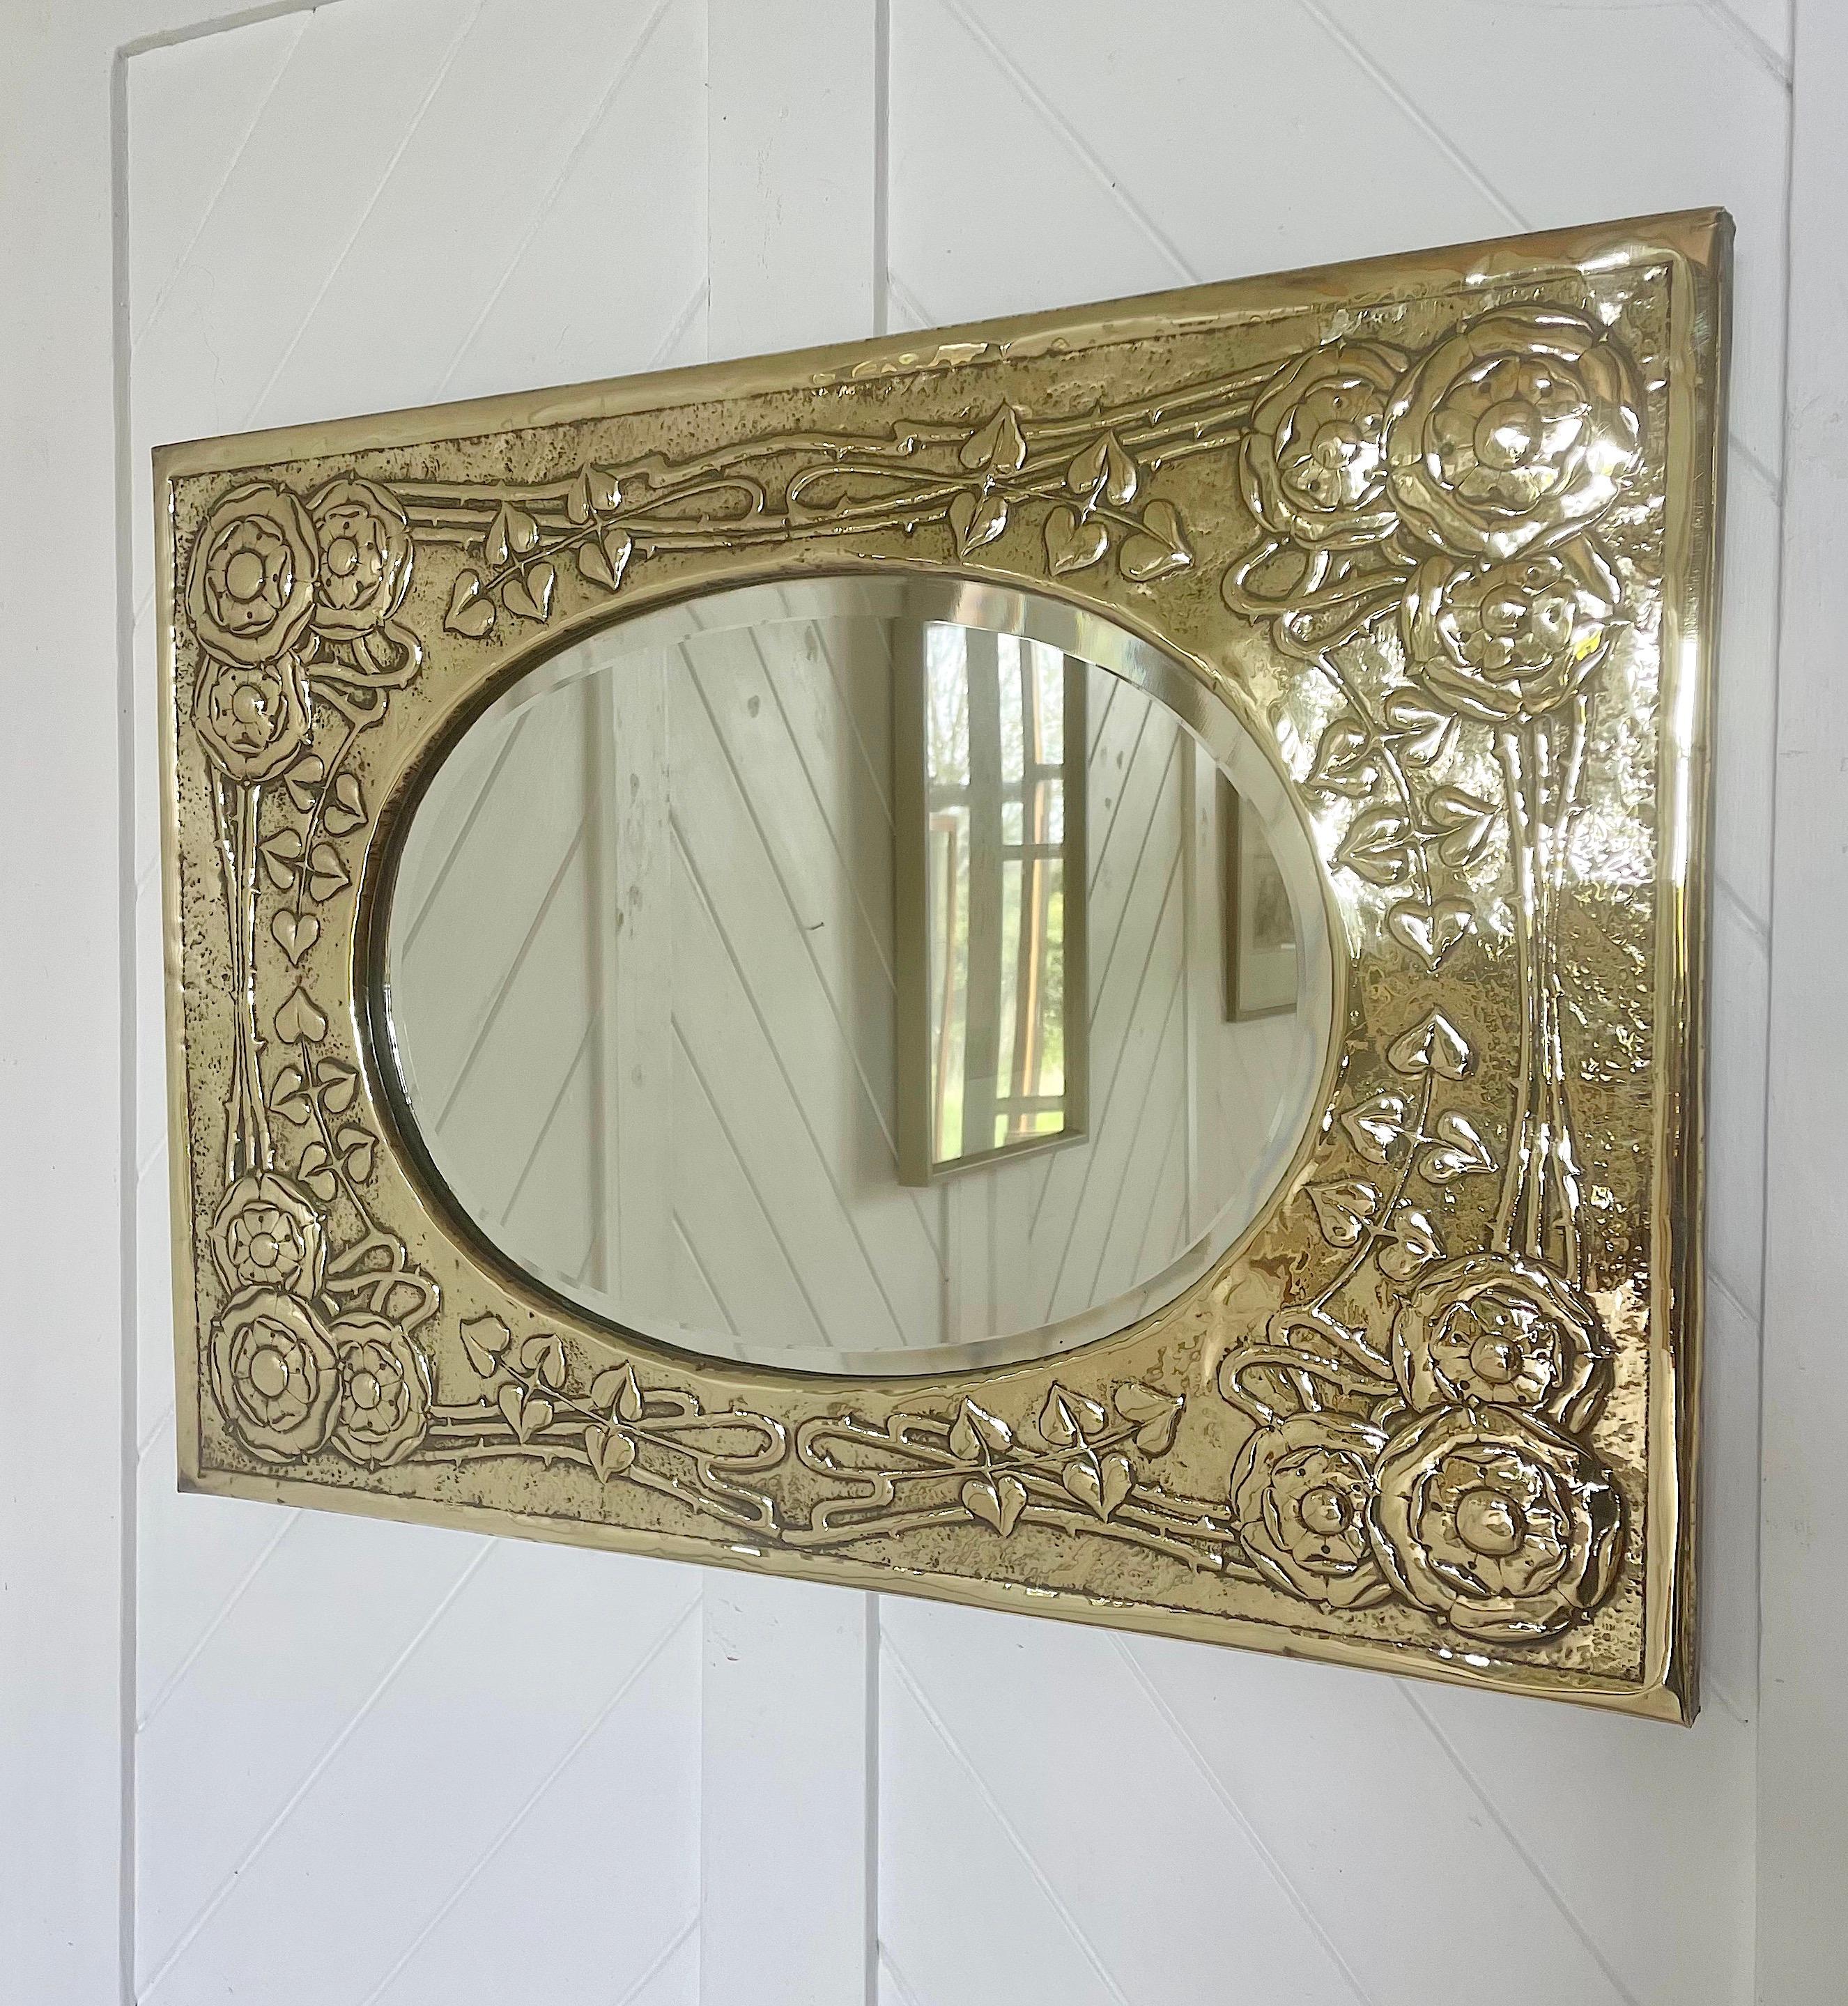 A beautiful GLASGOW SCHOOL Arts and Crafts Movement brass framed mirror by Marion Henderson Wilson, depicting intwined roses around a bevelled oval mirror.
Considered one of the “Glasgow Girls”, Marion Henderson Wilson attended the Glasgow School of